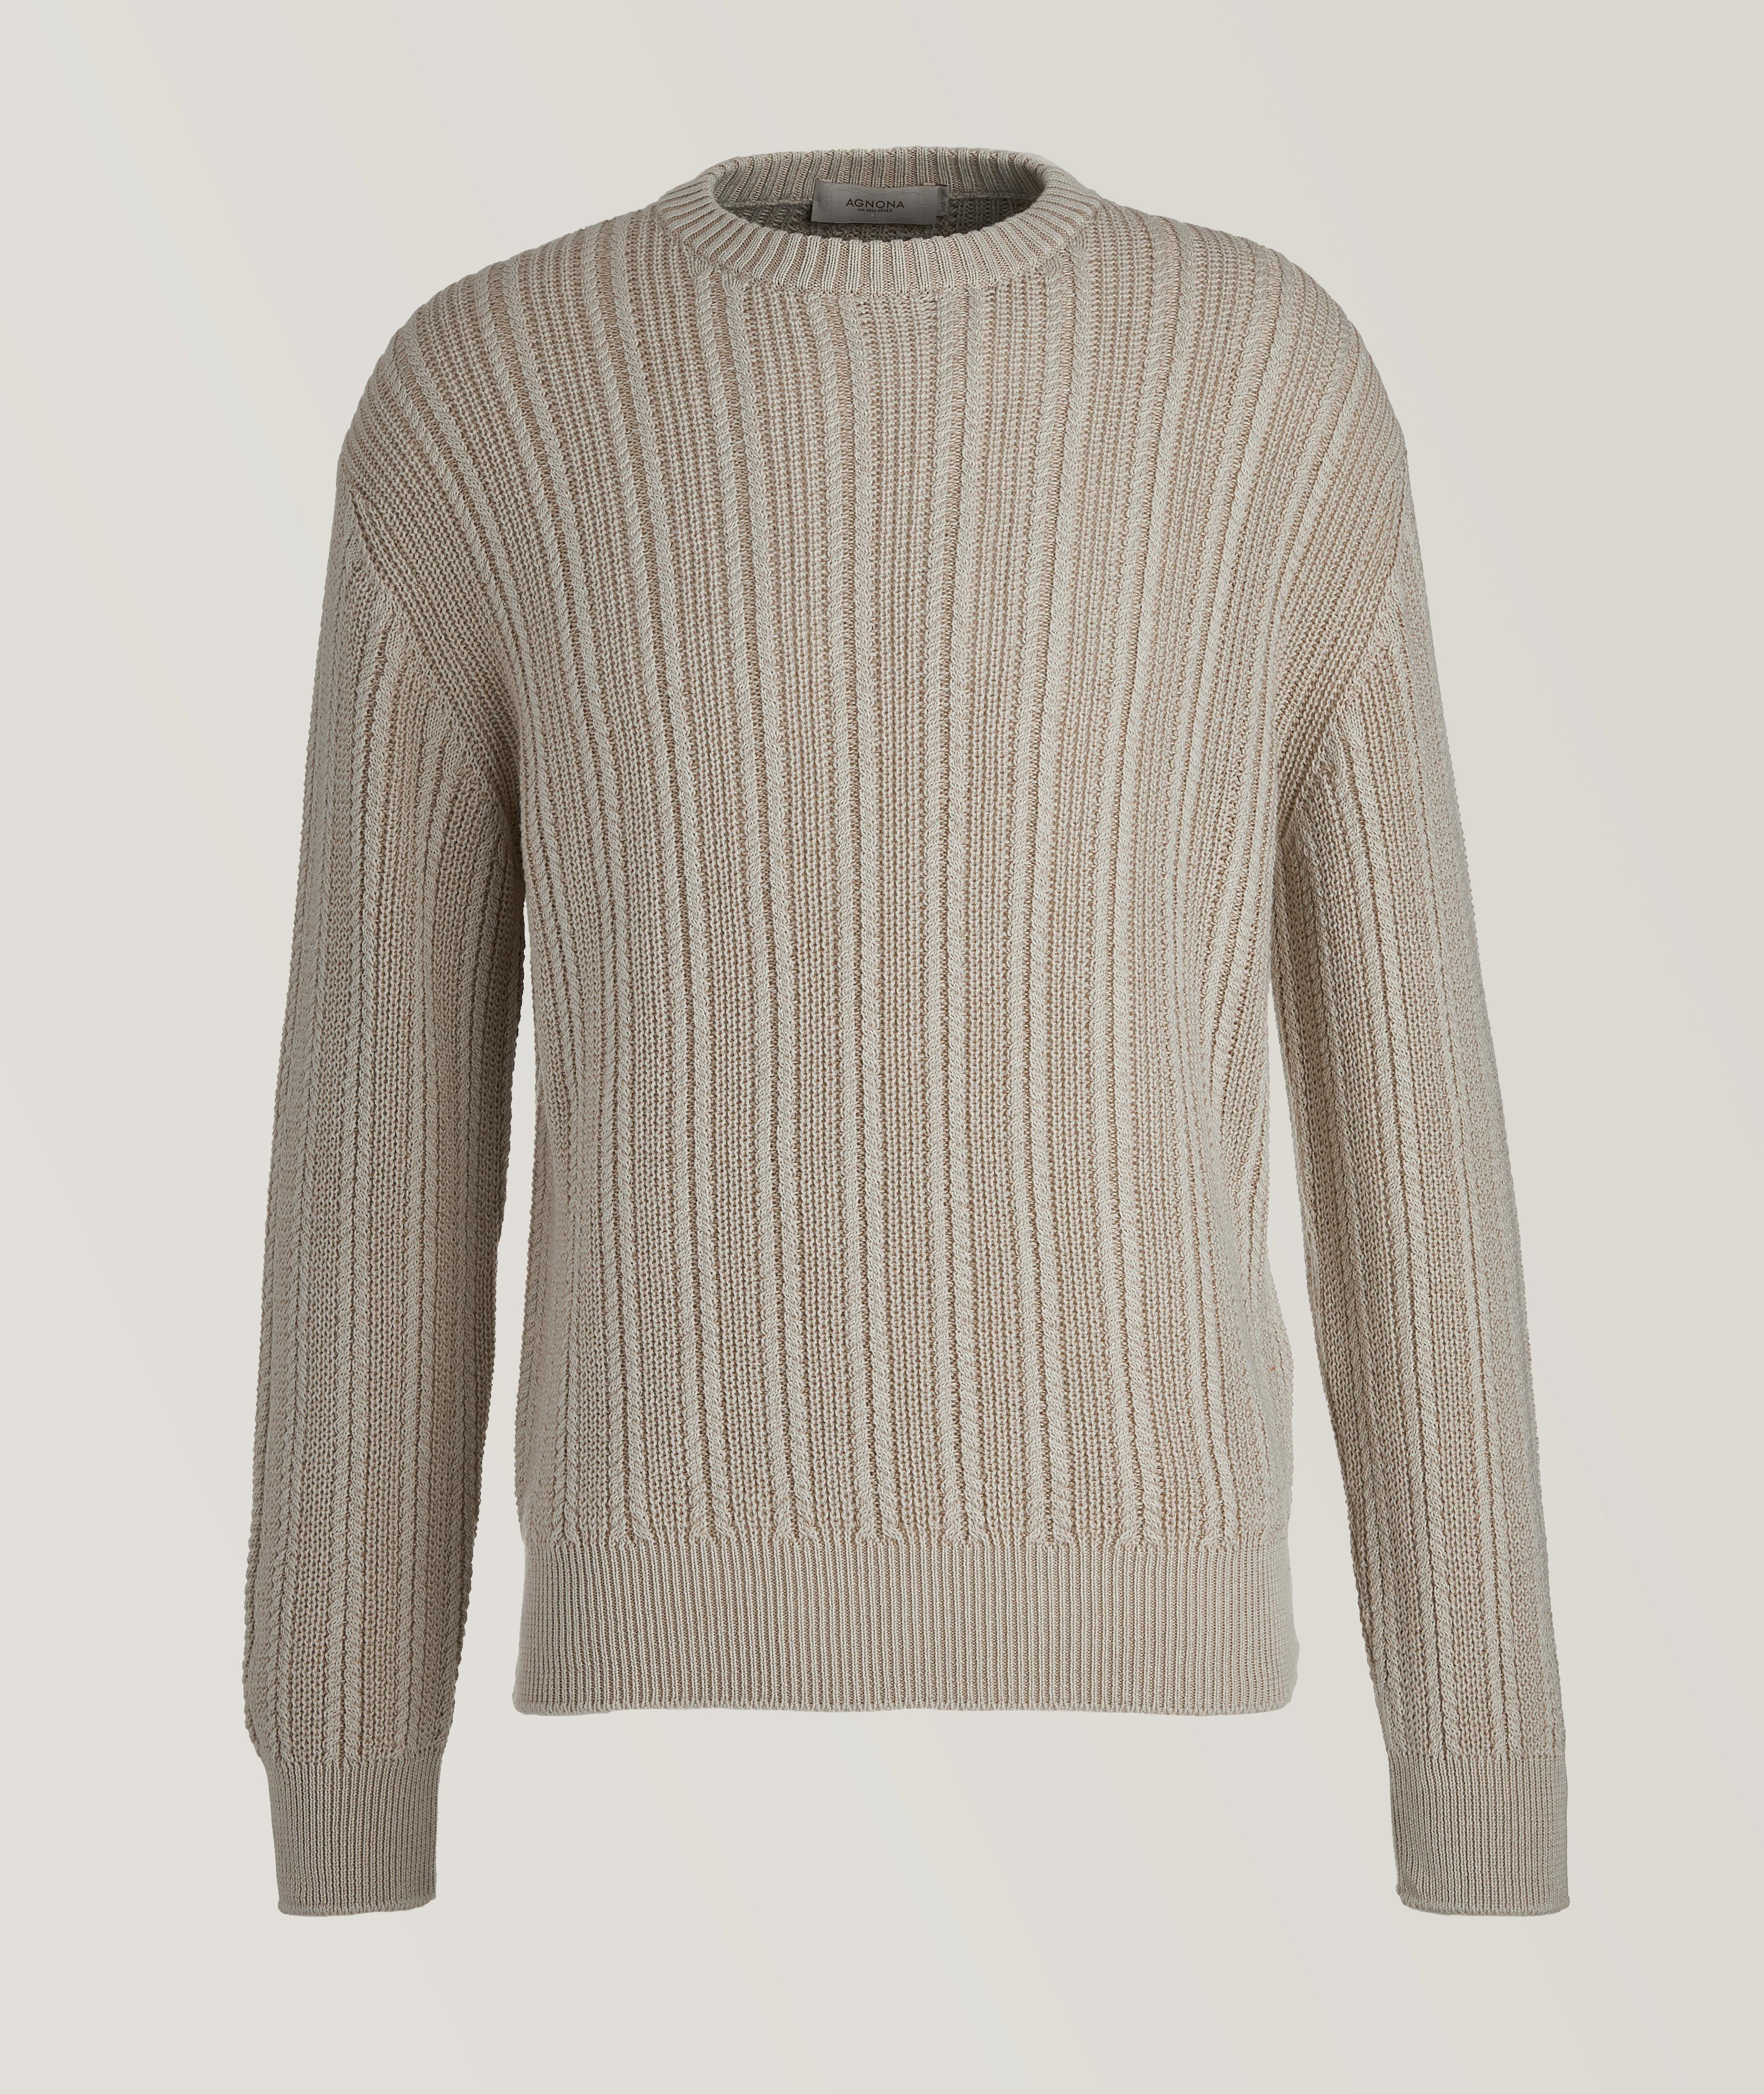 Silk,Cashmere & Cotton Micro Cable Knit Sweater image 0